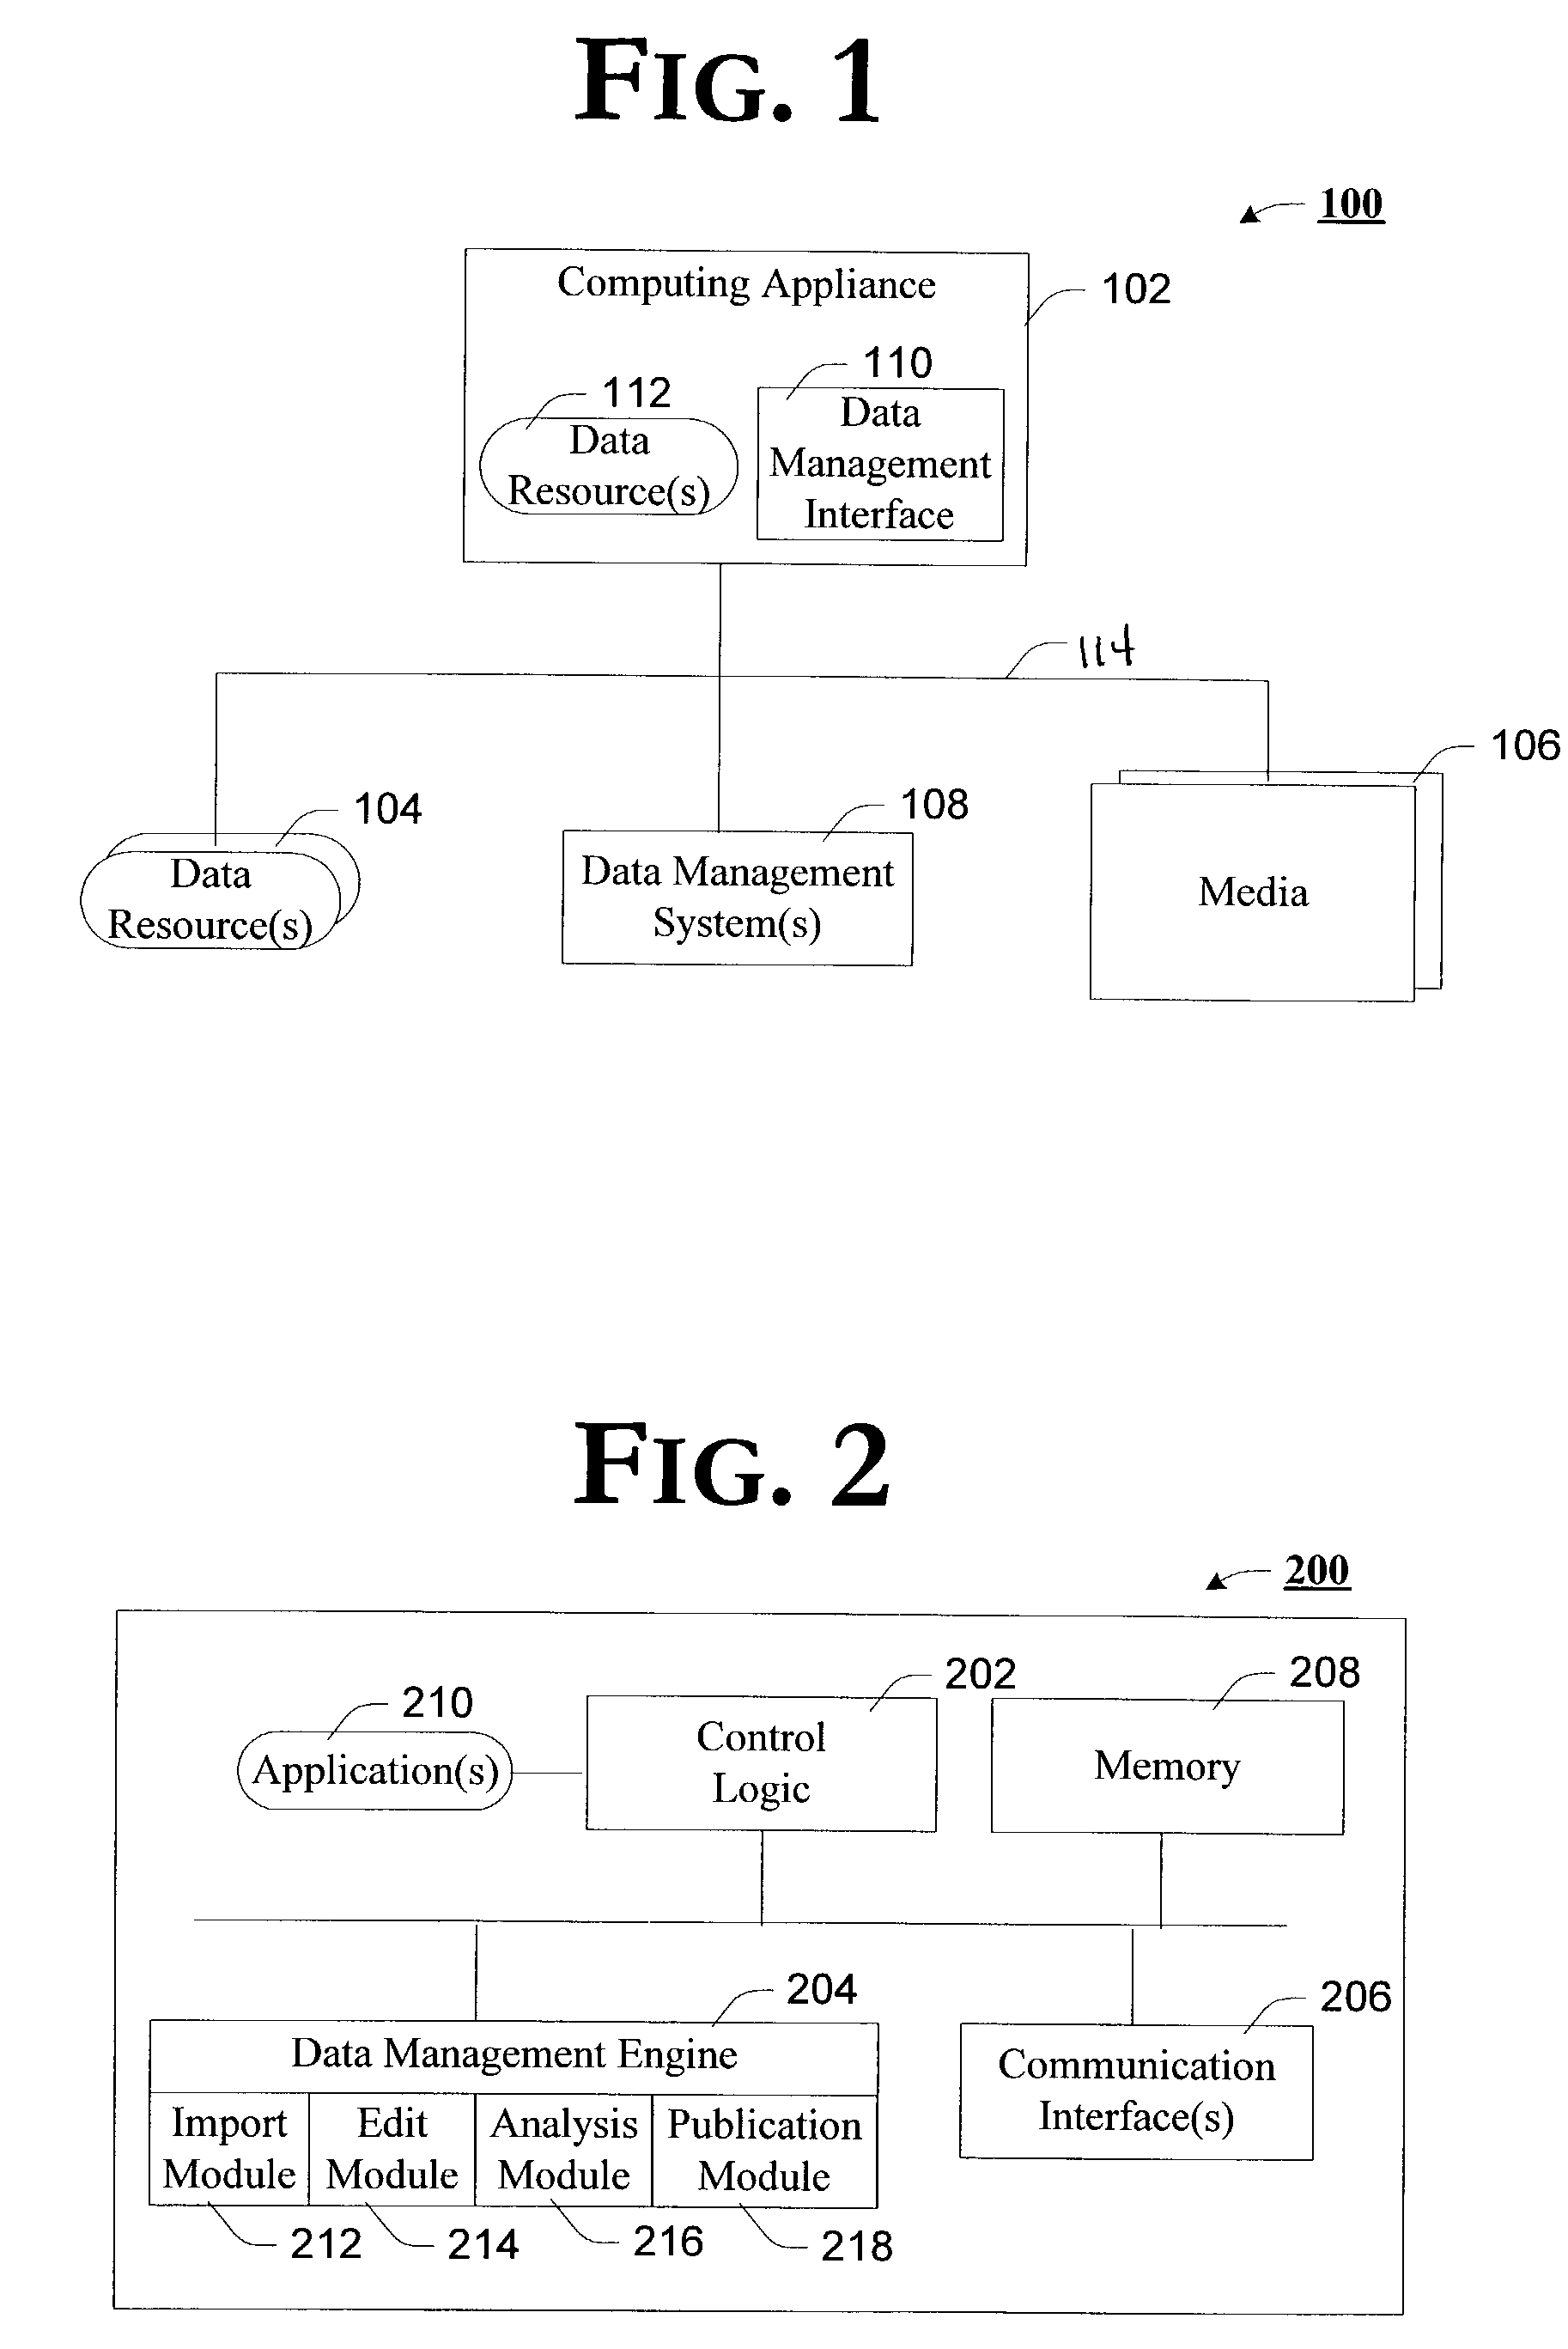 Data management interface capable of providing enhanced representation of imported electronic content